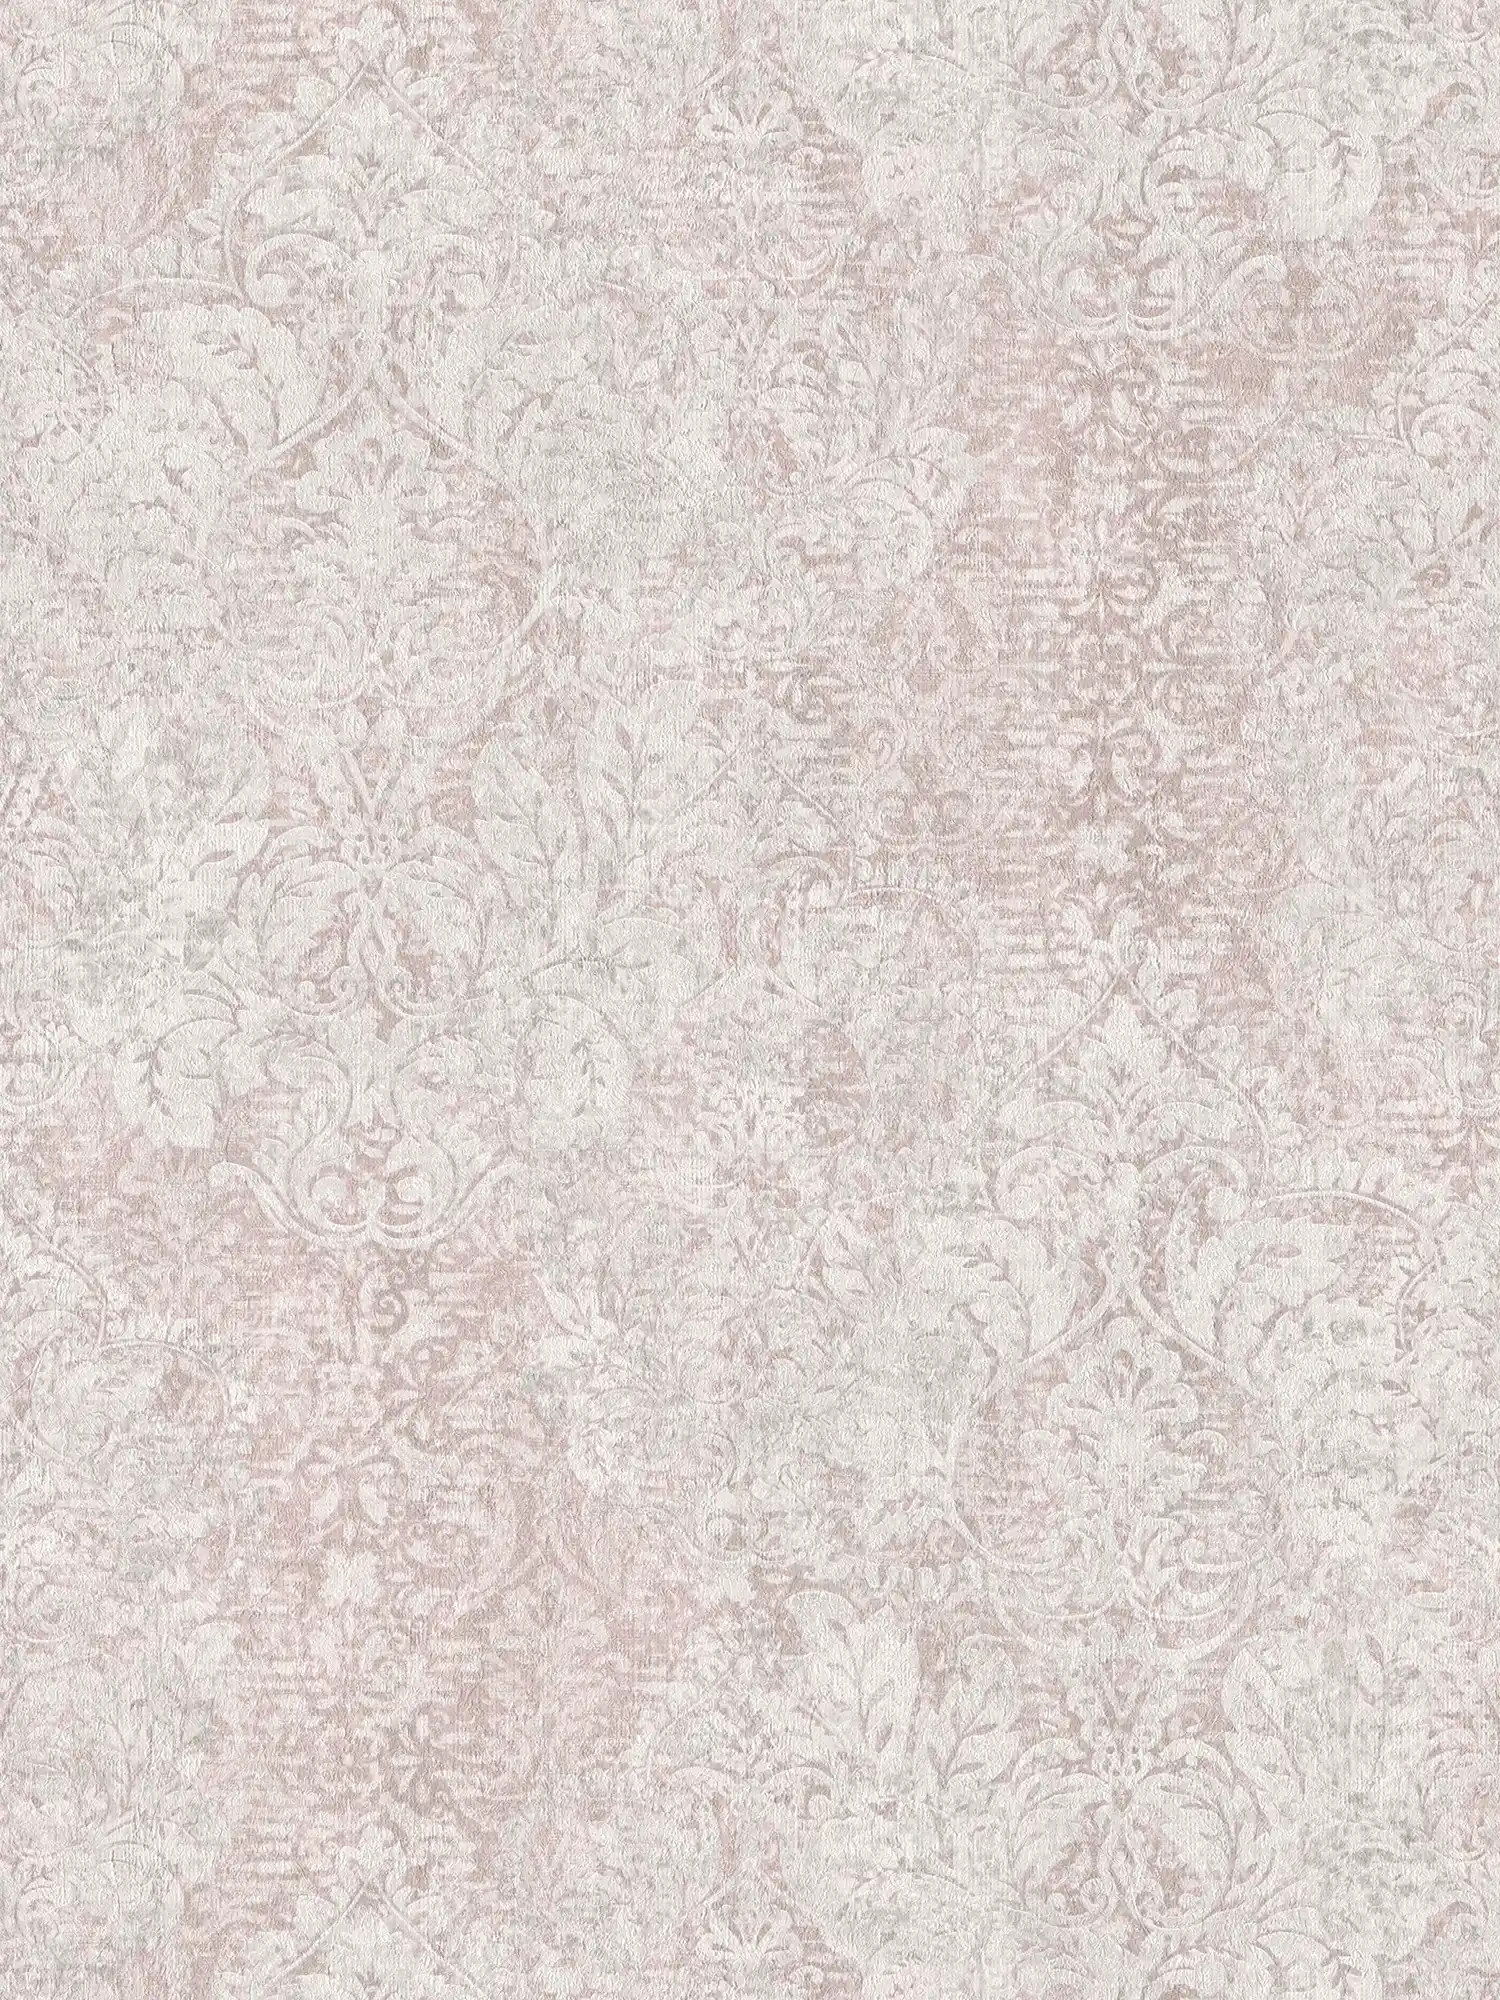 Vintage non-woven wallpaper old pink with ornament pattern - cream
